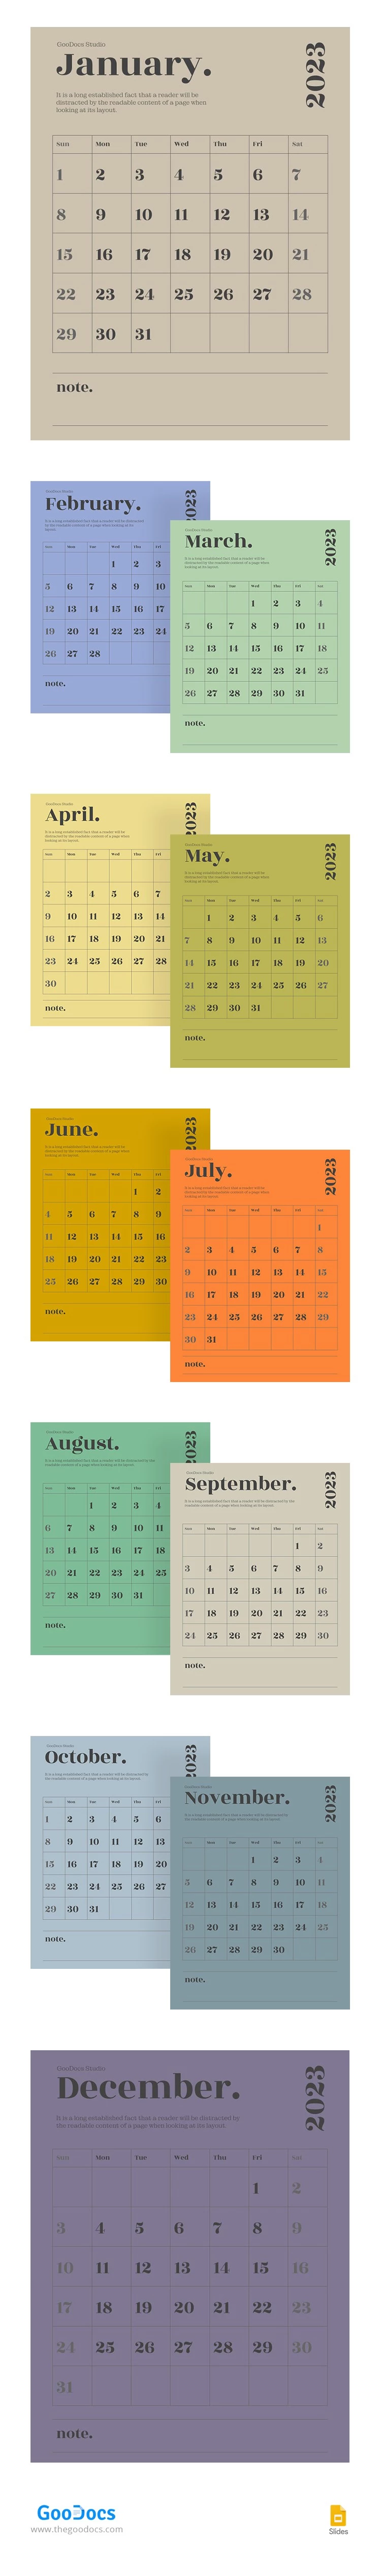 Calendrier scolaire moderne - free Google Docs Template - 10064654